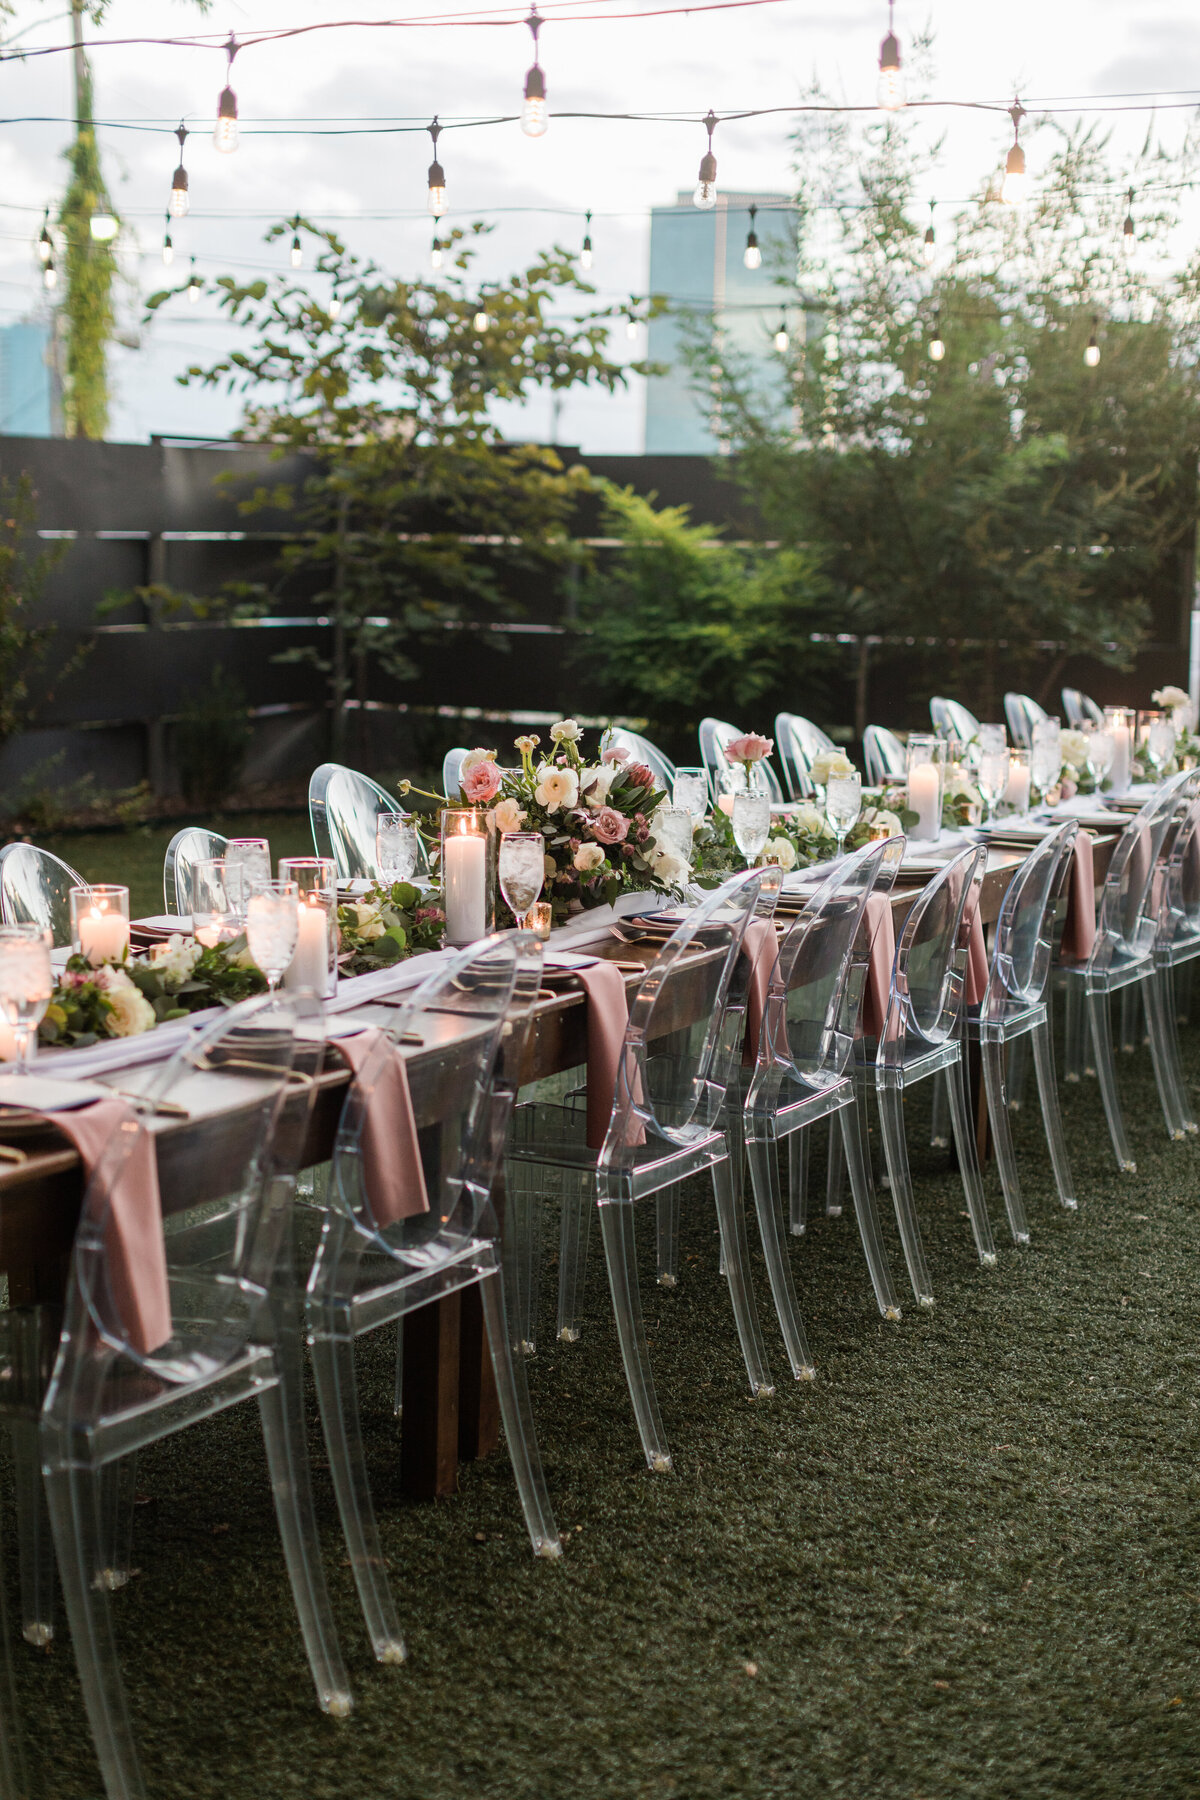 A detail shot of the main reception table at a wedding at Artspace111 in Fort Worth, Texas. The table is covered with fancy place settings, pale pink napkins, candles, and large array of floral centerpieces. The chairs are clear and surround both sides of the table.